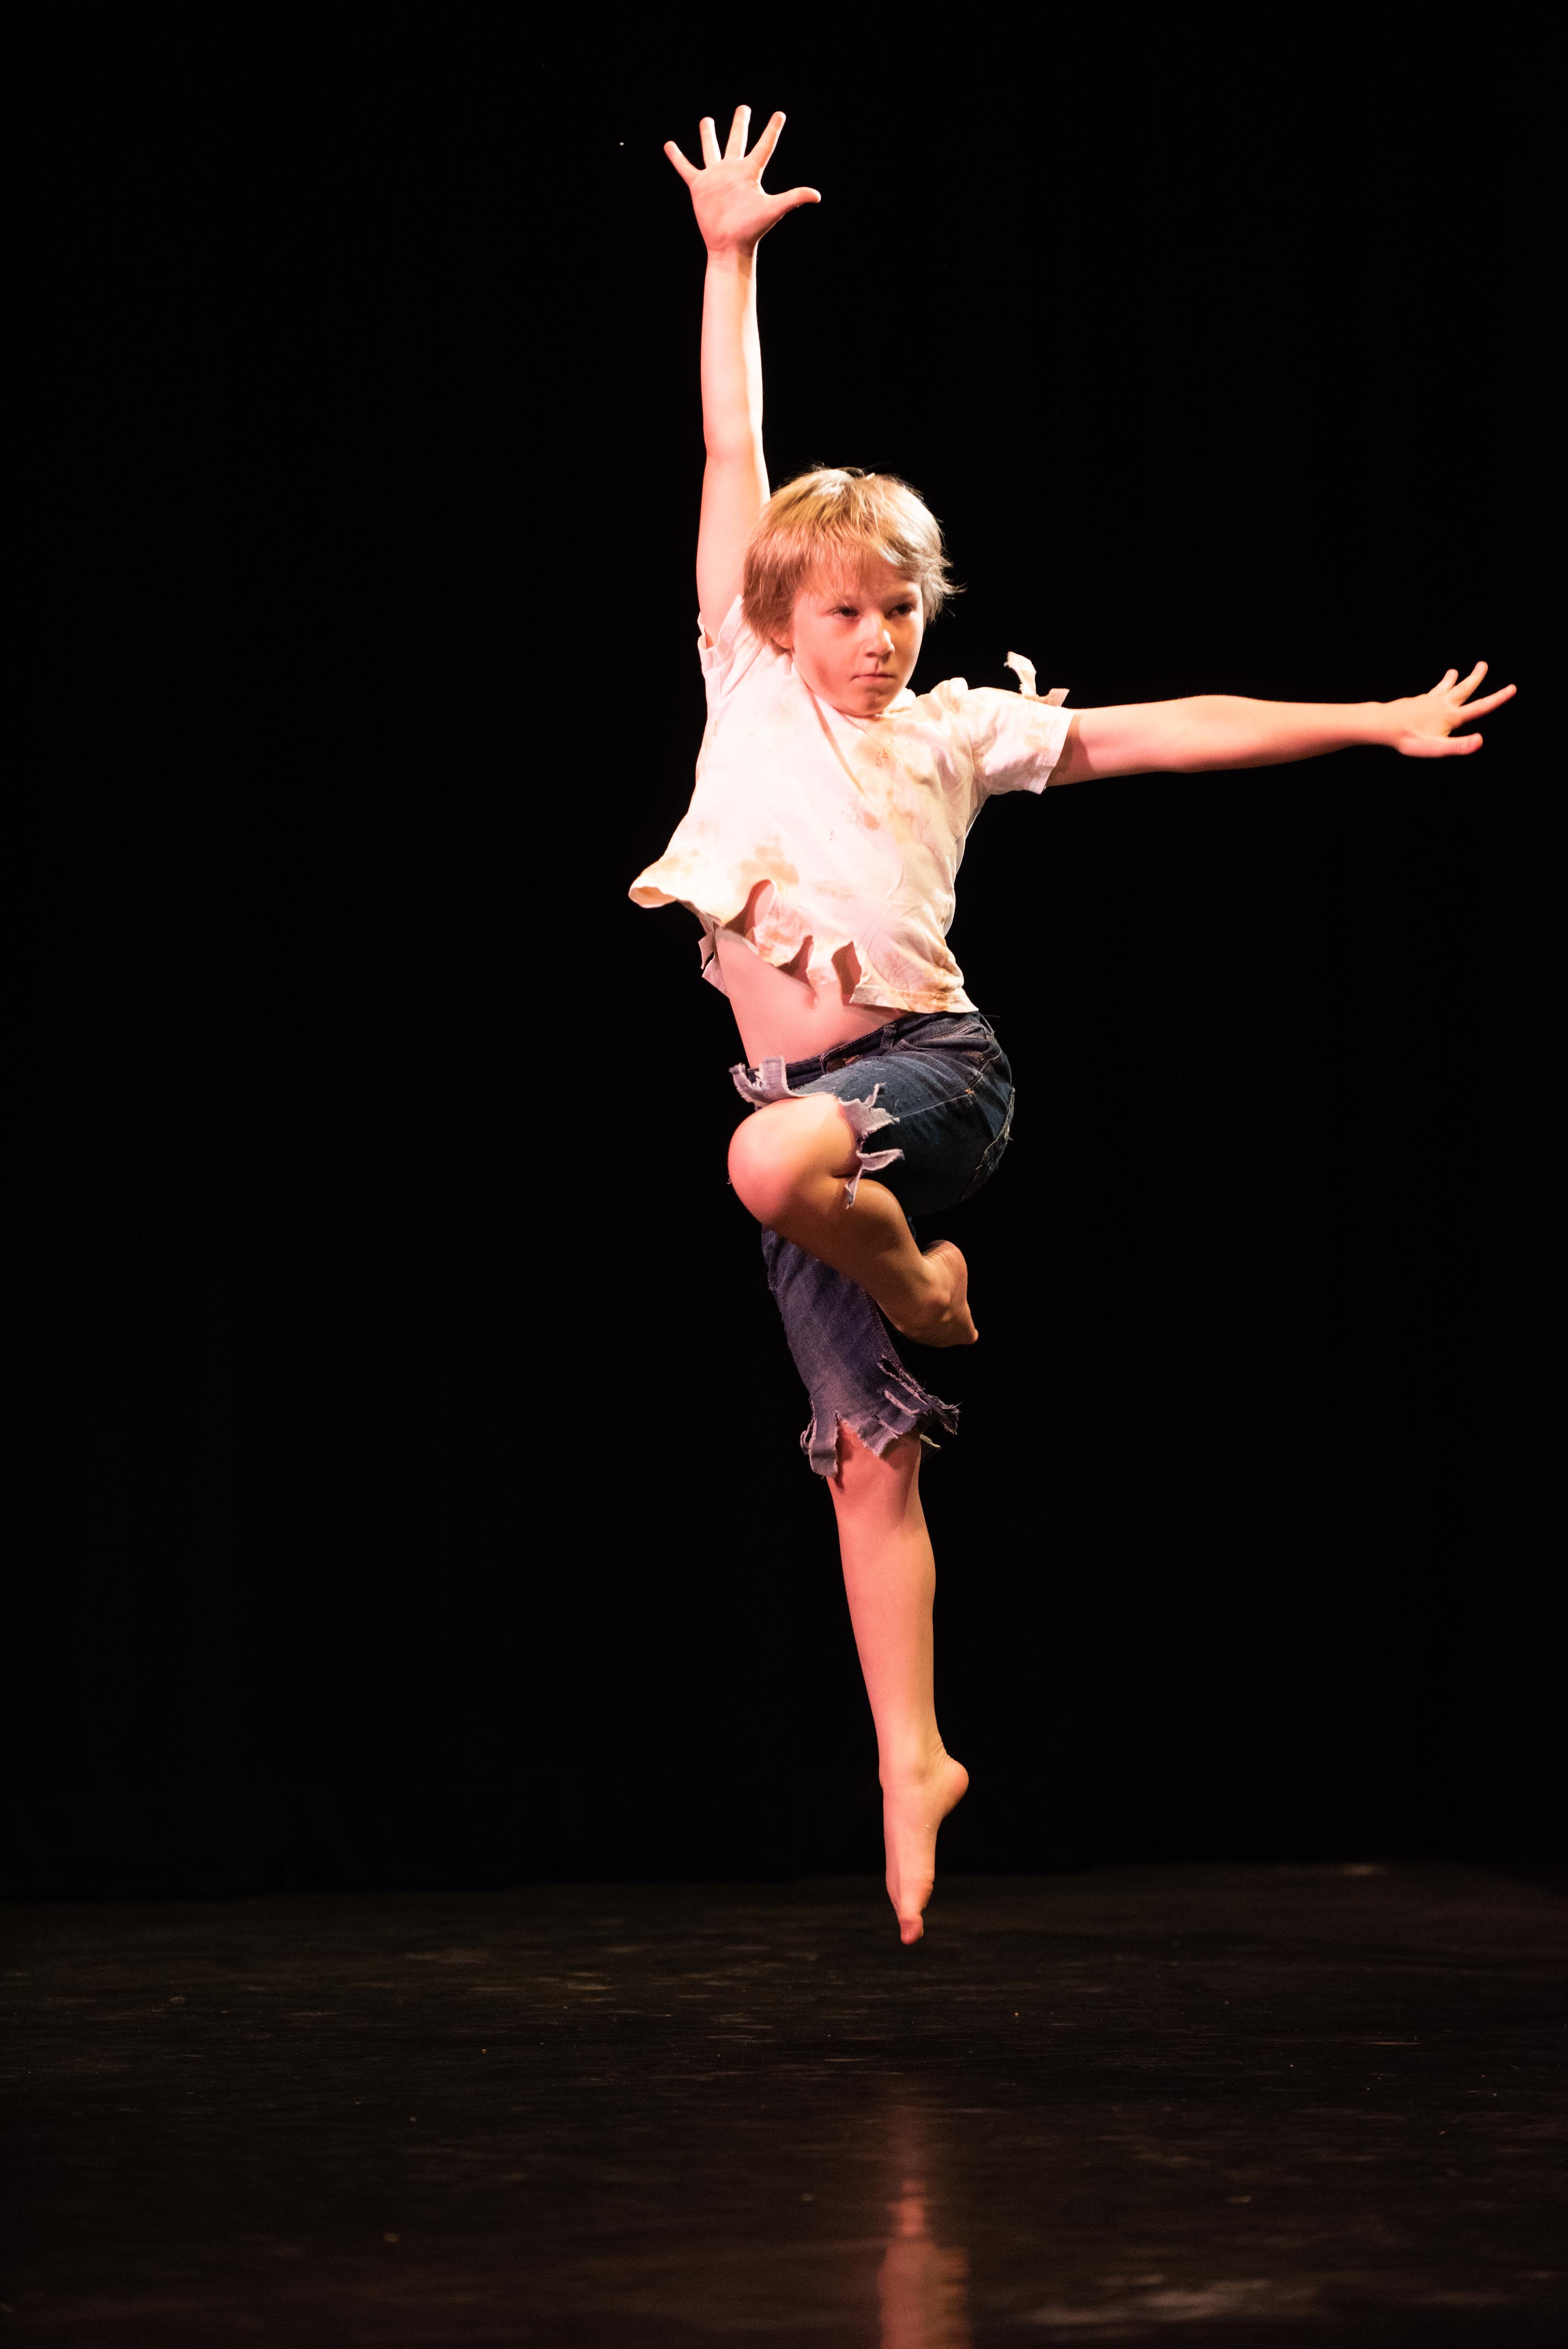 Young male dancer leaping